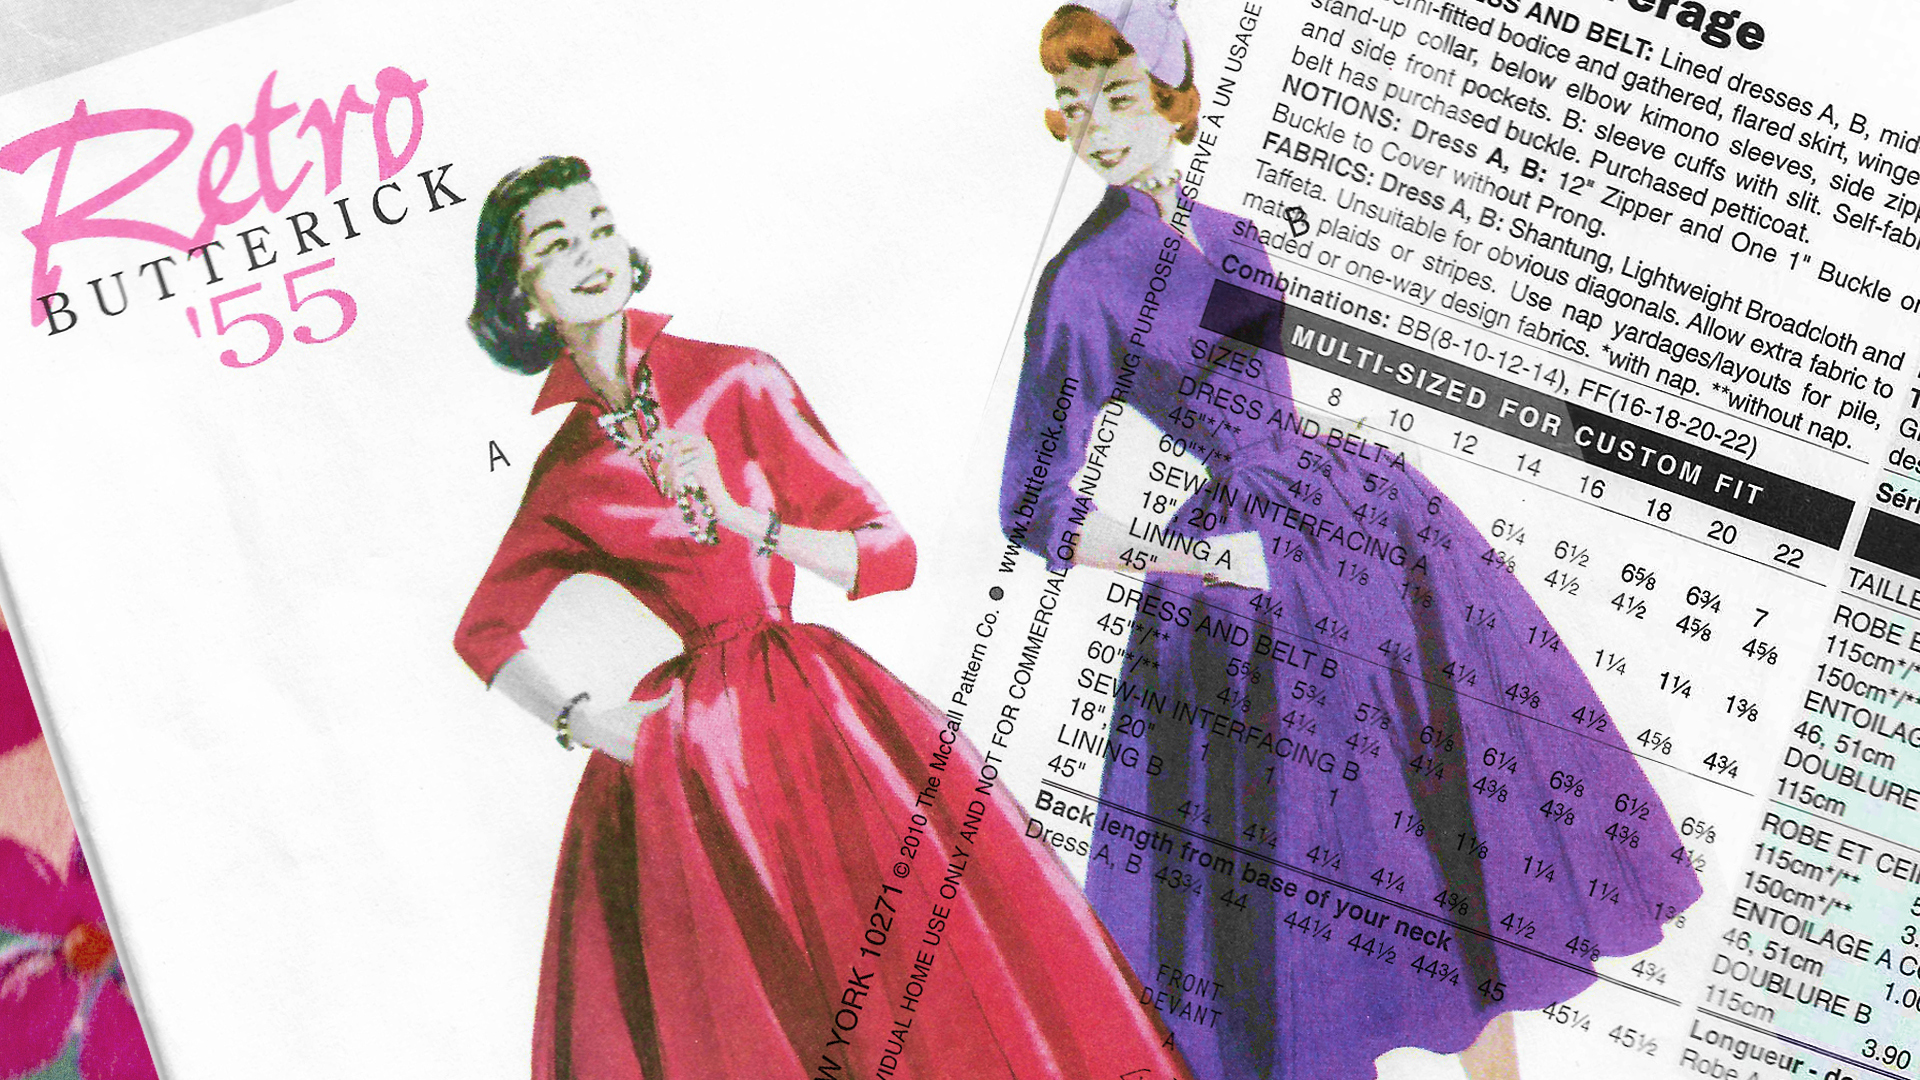 Sewing Pattern Envelope scan of a dress from 1955 with two collar options. Envelope back scan is overlaid on the top.